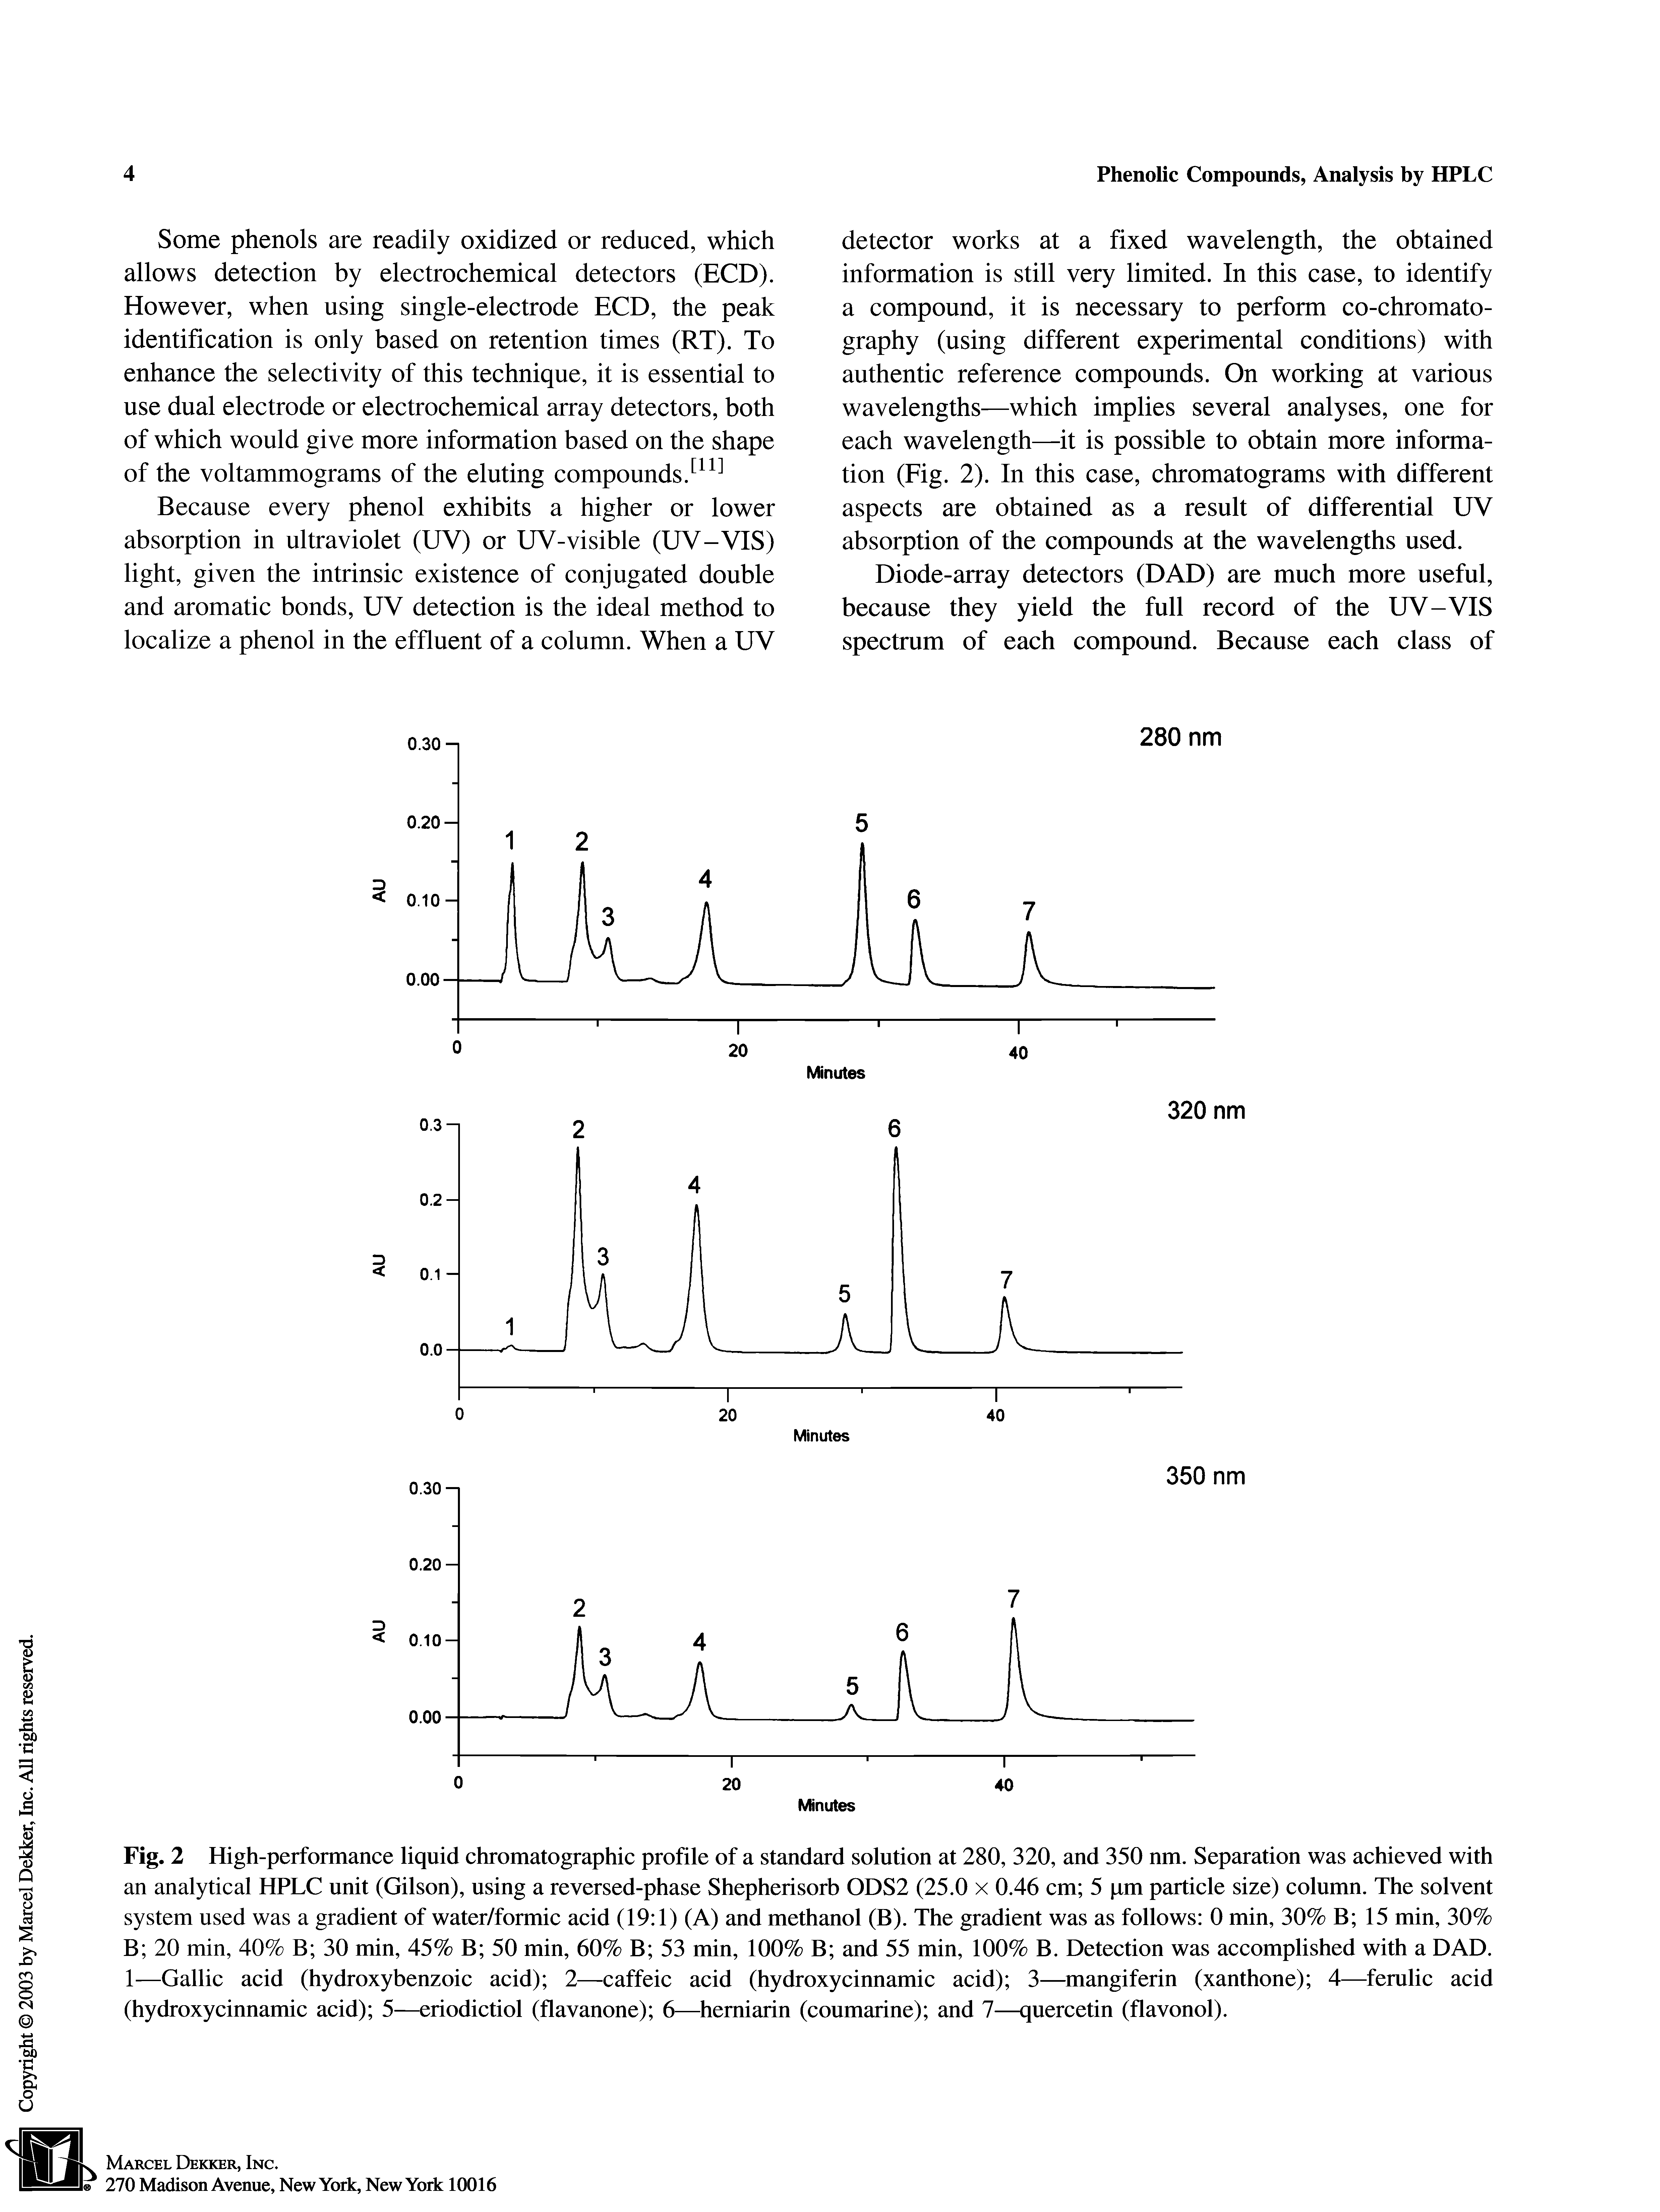 Fig. 2 High-performance liquid chromatographic profile of a standard solution at 280, 320, and 350 nm. Separation was achieved with an analytical HPLC unit (Gilson), using a reversed-phase Shepherisorb ODS2 (25.0 x 0.46 cm 5 pm particle size) column. The solvent system used was a gradient of water/formic acid (19 1) (A) and methanol (B). The gradient was as follows 0 min, 30% B 15 min, 30% B 20 min, 40% B 30 min, 45% B 50 min, 60% B 53 min, 100% B and 55 min, 100% B. Detection was accomplished with a DAD. 1—Gallic acid (hydroxybenzoic acid) 2—caffeic acid (hydroxycinnamic acid) 3—mangiferin (xanthone) 4—ferulic acid (hydroxycinnamic acid) 5—eriodictiol (flavanone) 6—hemiarin (coumarine) and 7—quercetin (flavonol).